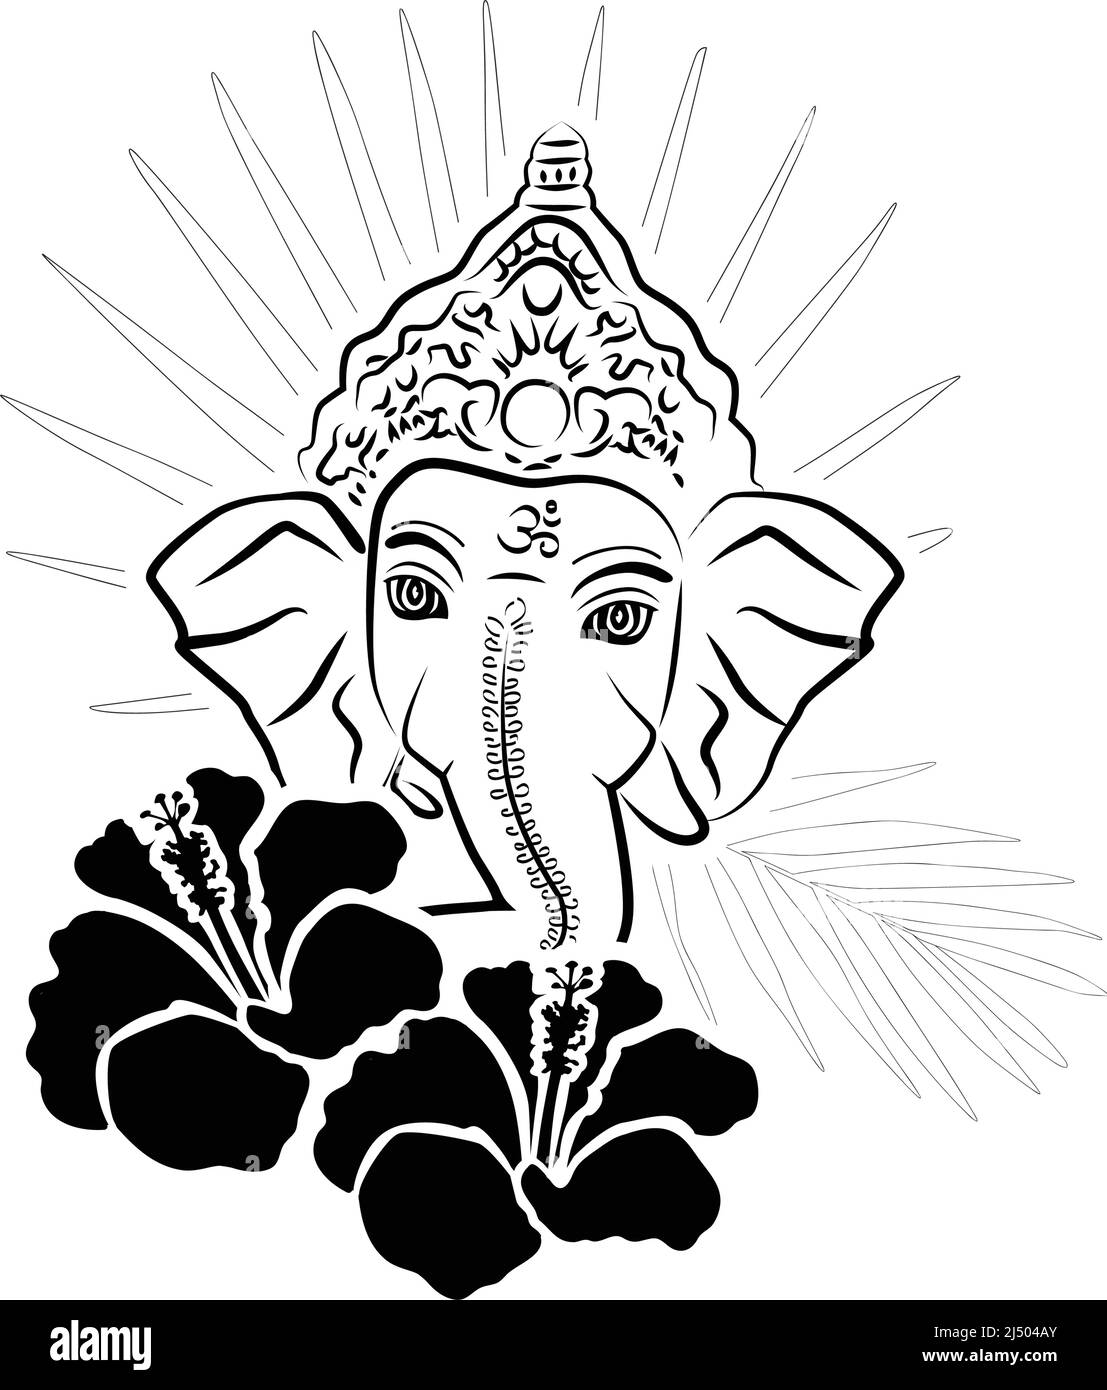 Ganesha vector Black and White Stock Photos & Images - Alamy